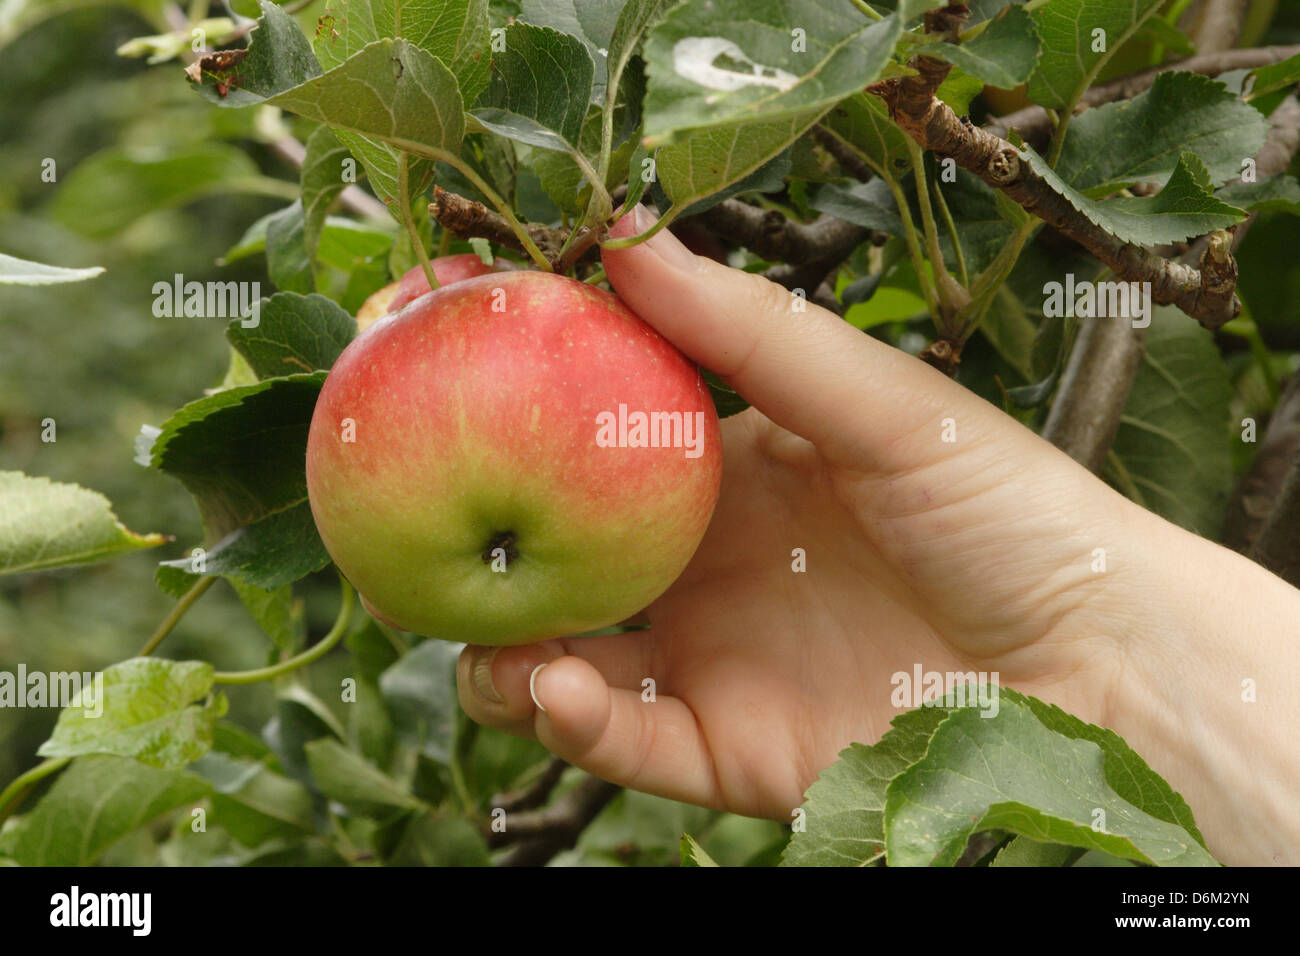 A ripe discovery apple is being picked off a tree. Stock Photo